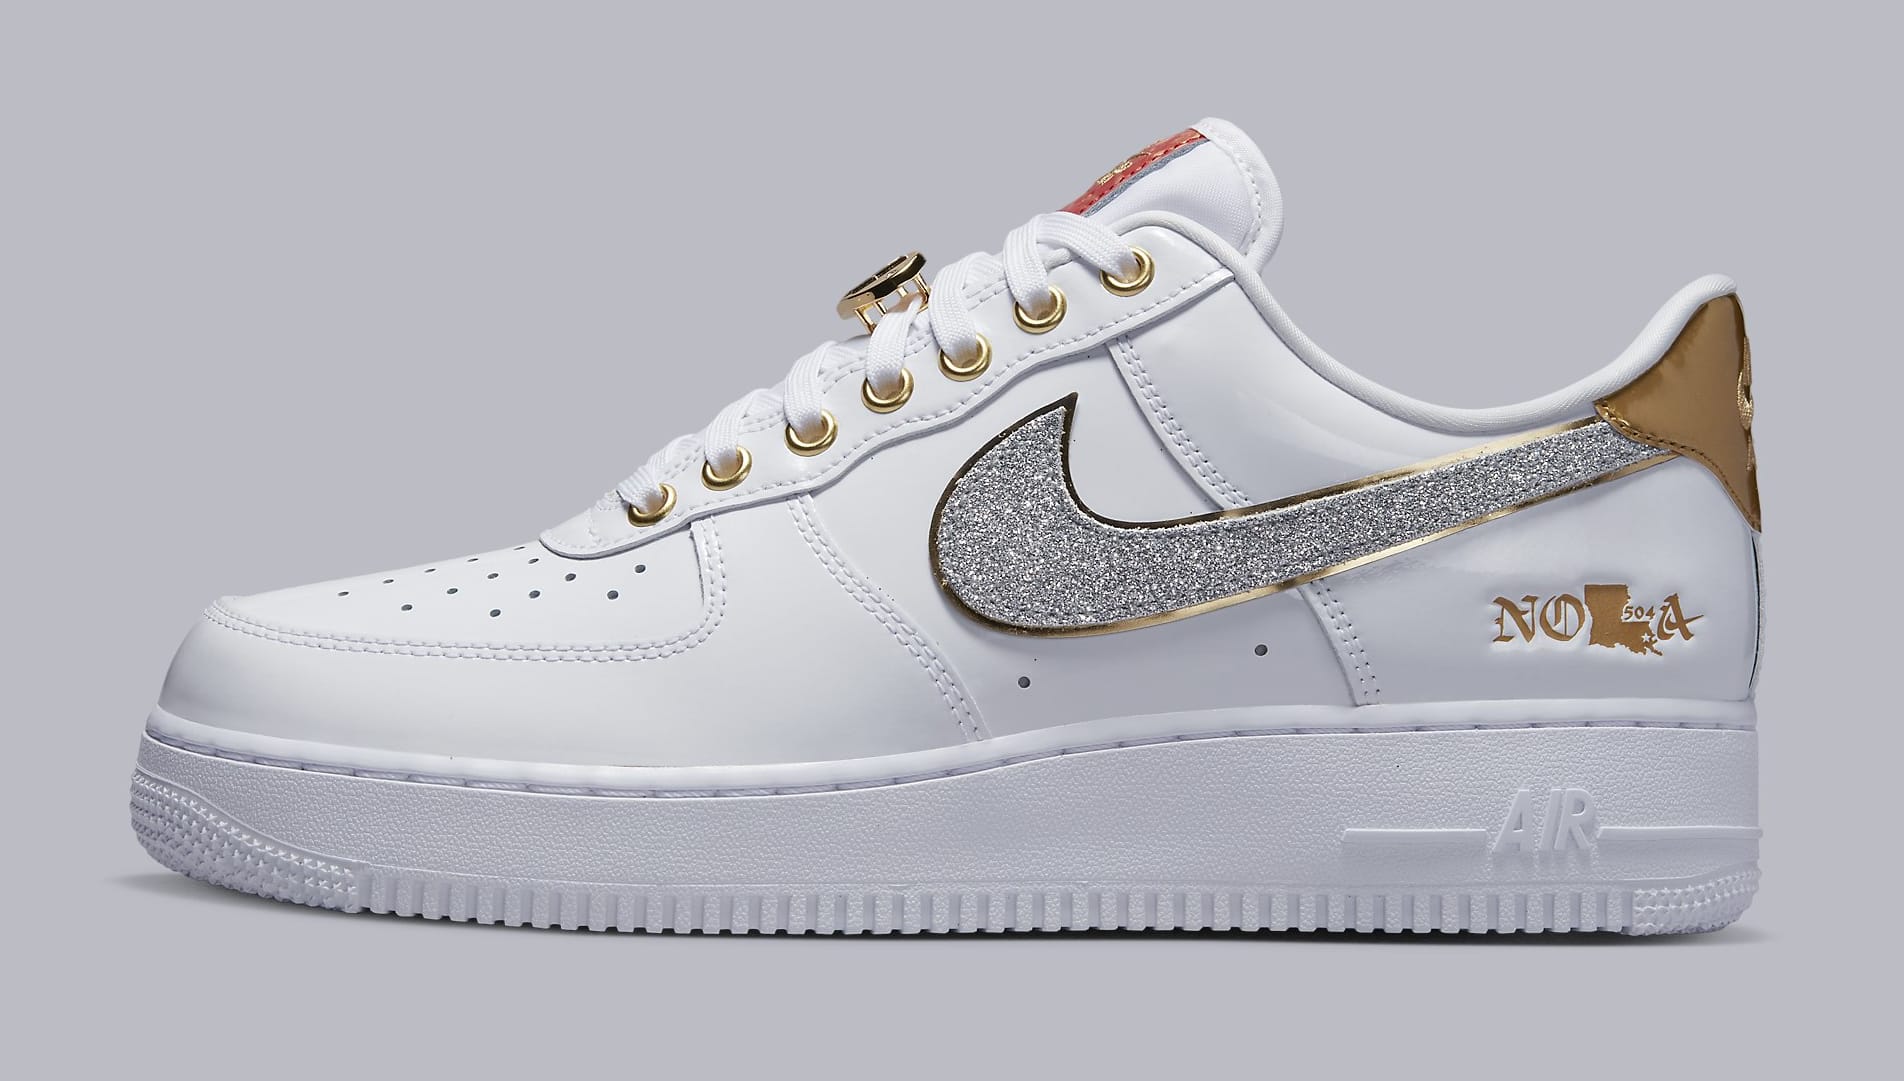 Nike Air Force 1 Low 'Nola' DZ5425 100 Lateral